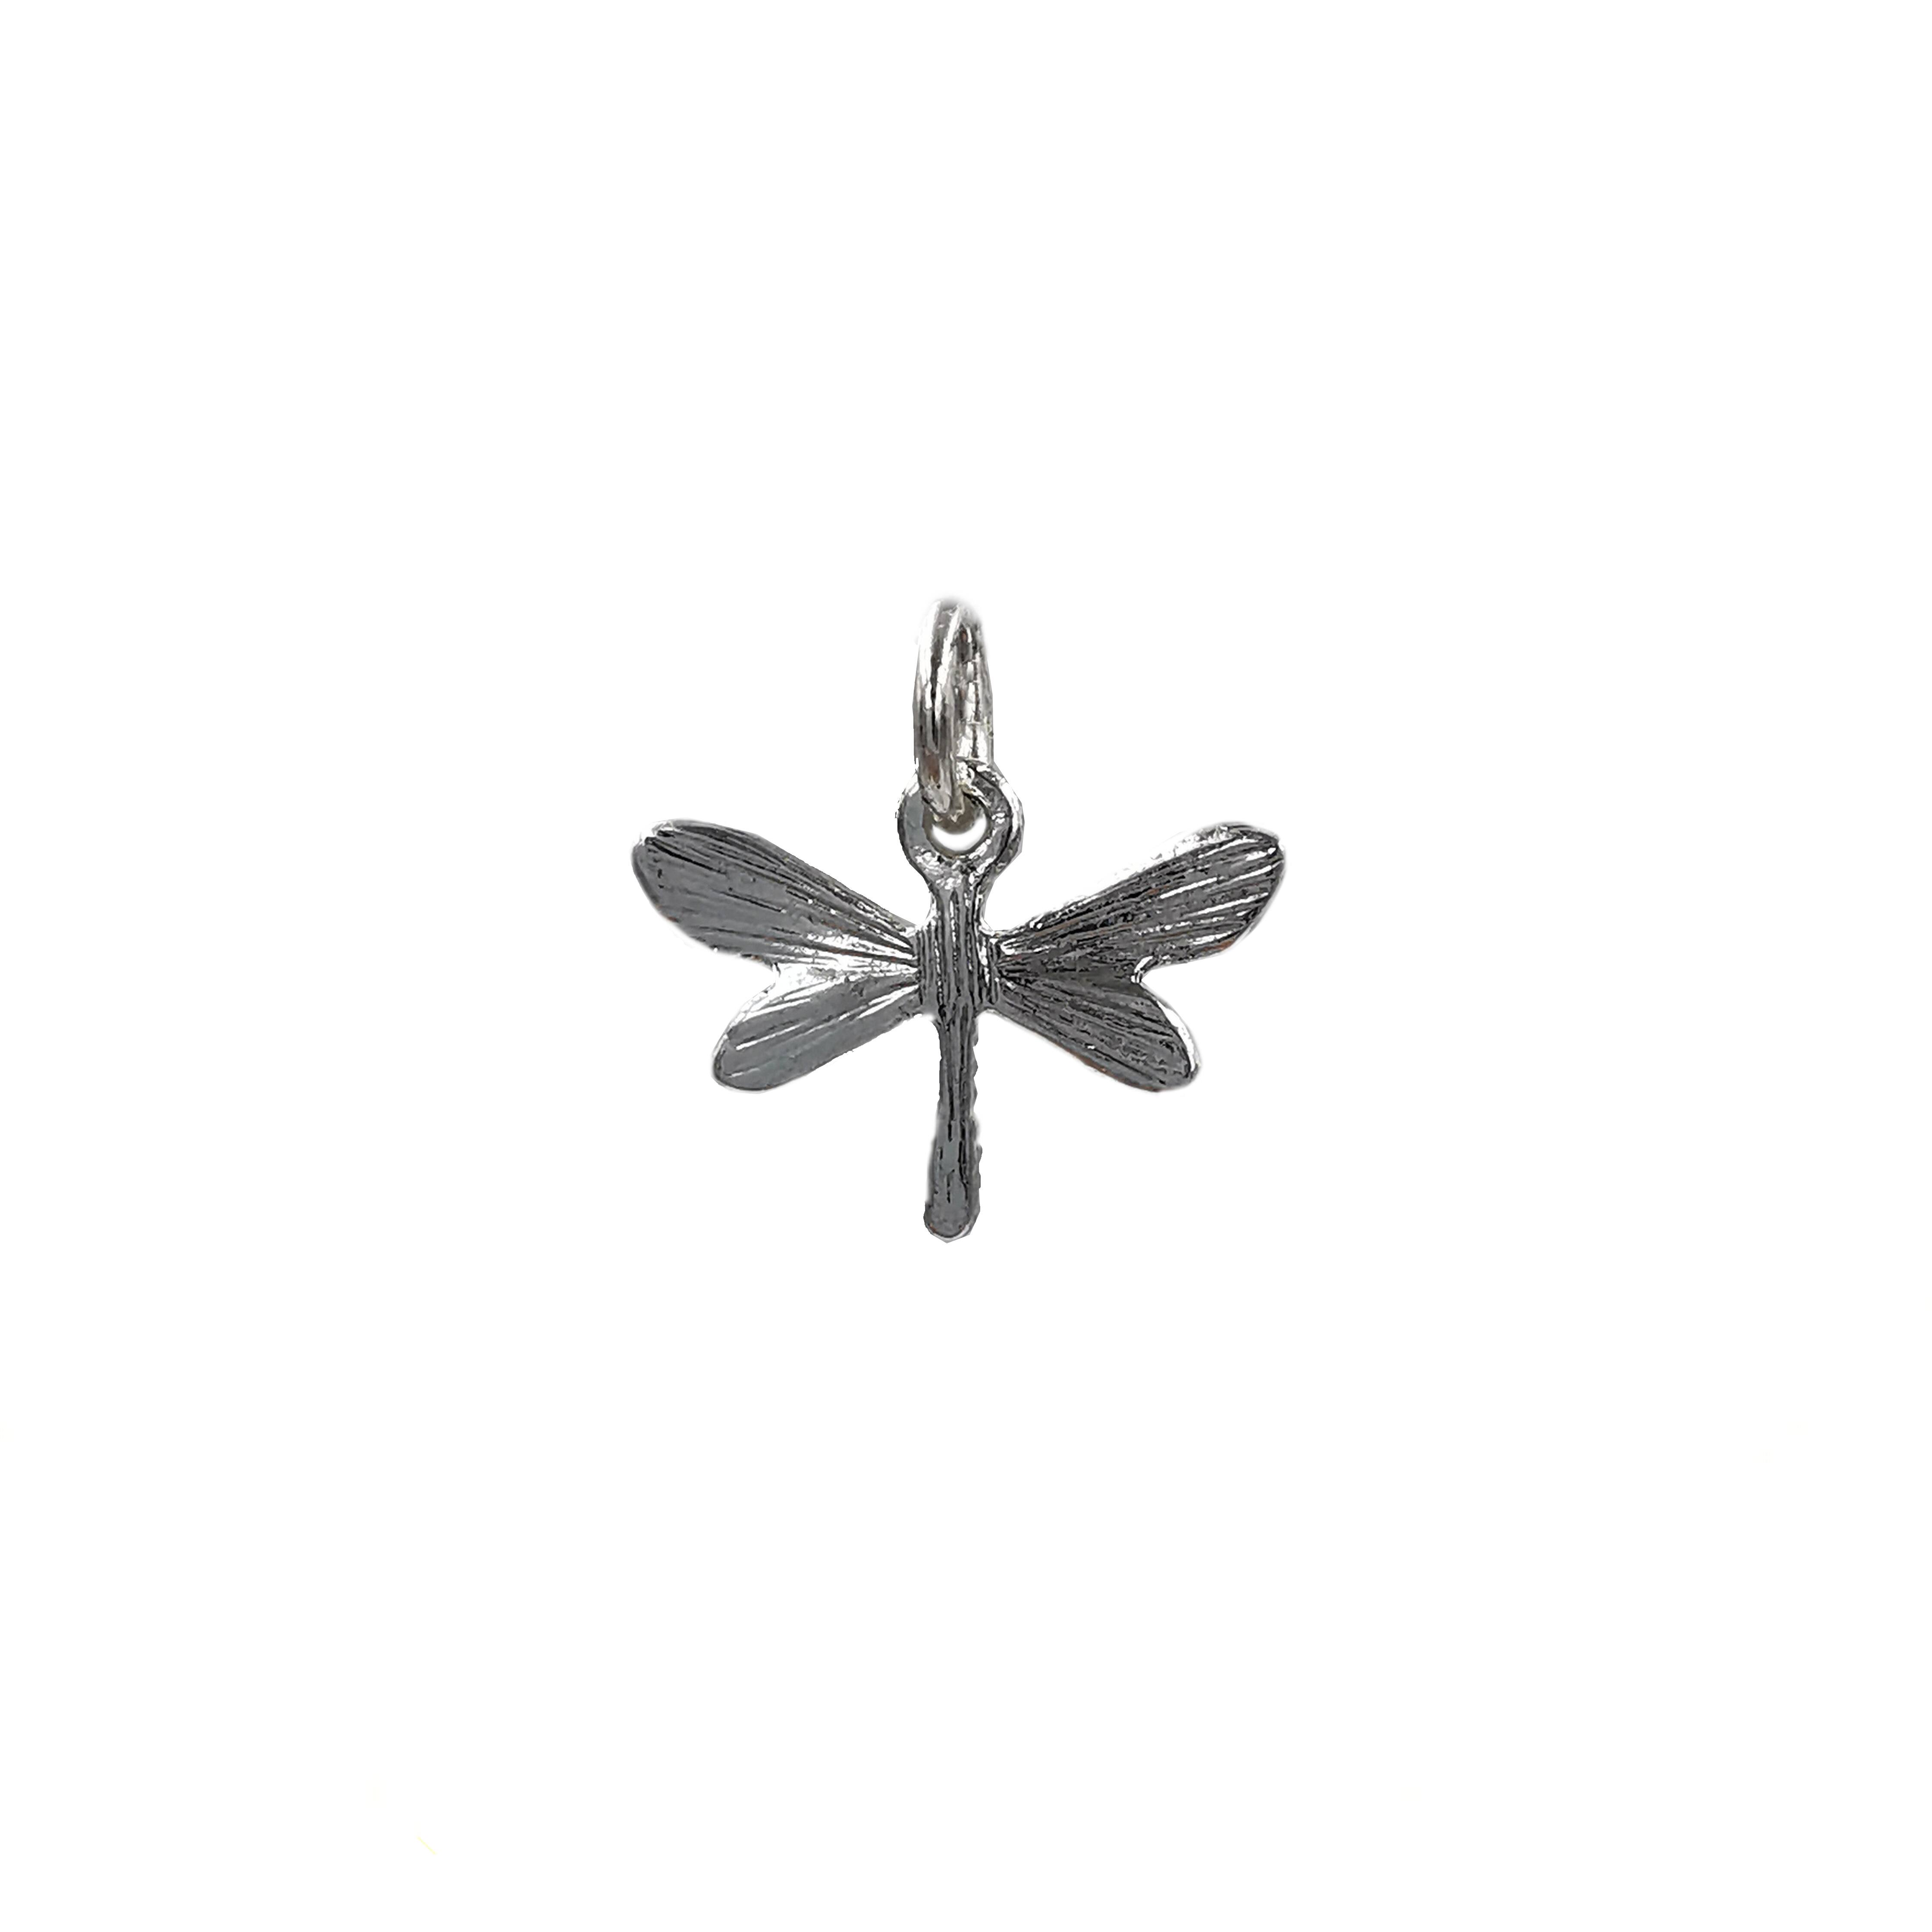 Charmed Craft Dangle Dragonfly Charm Beads for Charm Bracelets